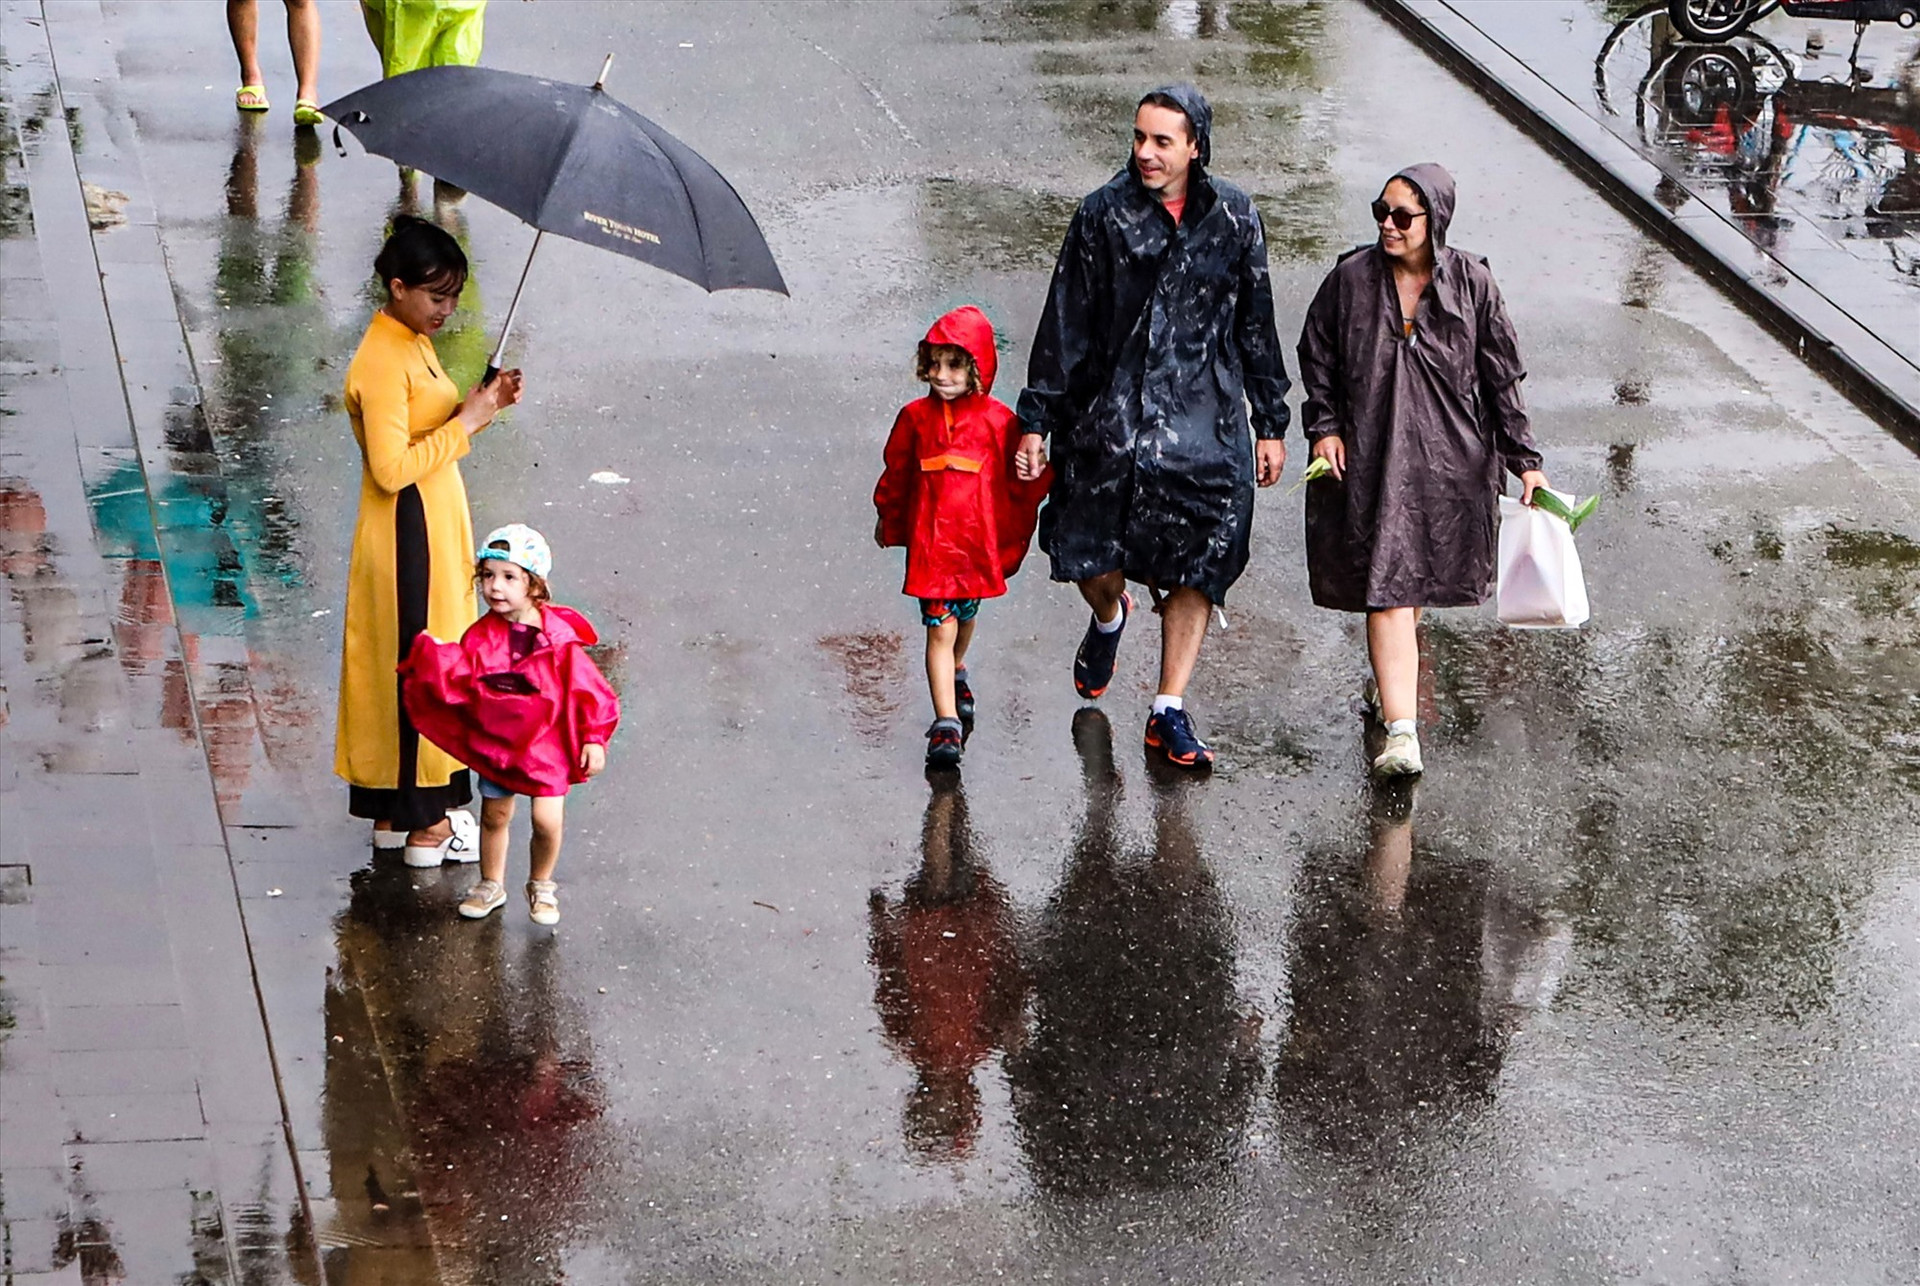 Foreign tourists walking in the rain